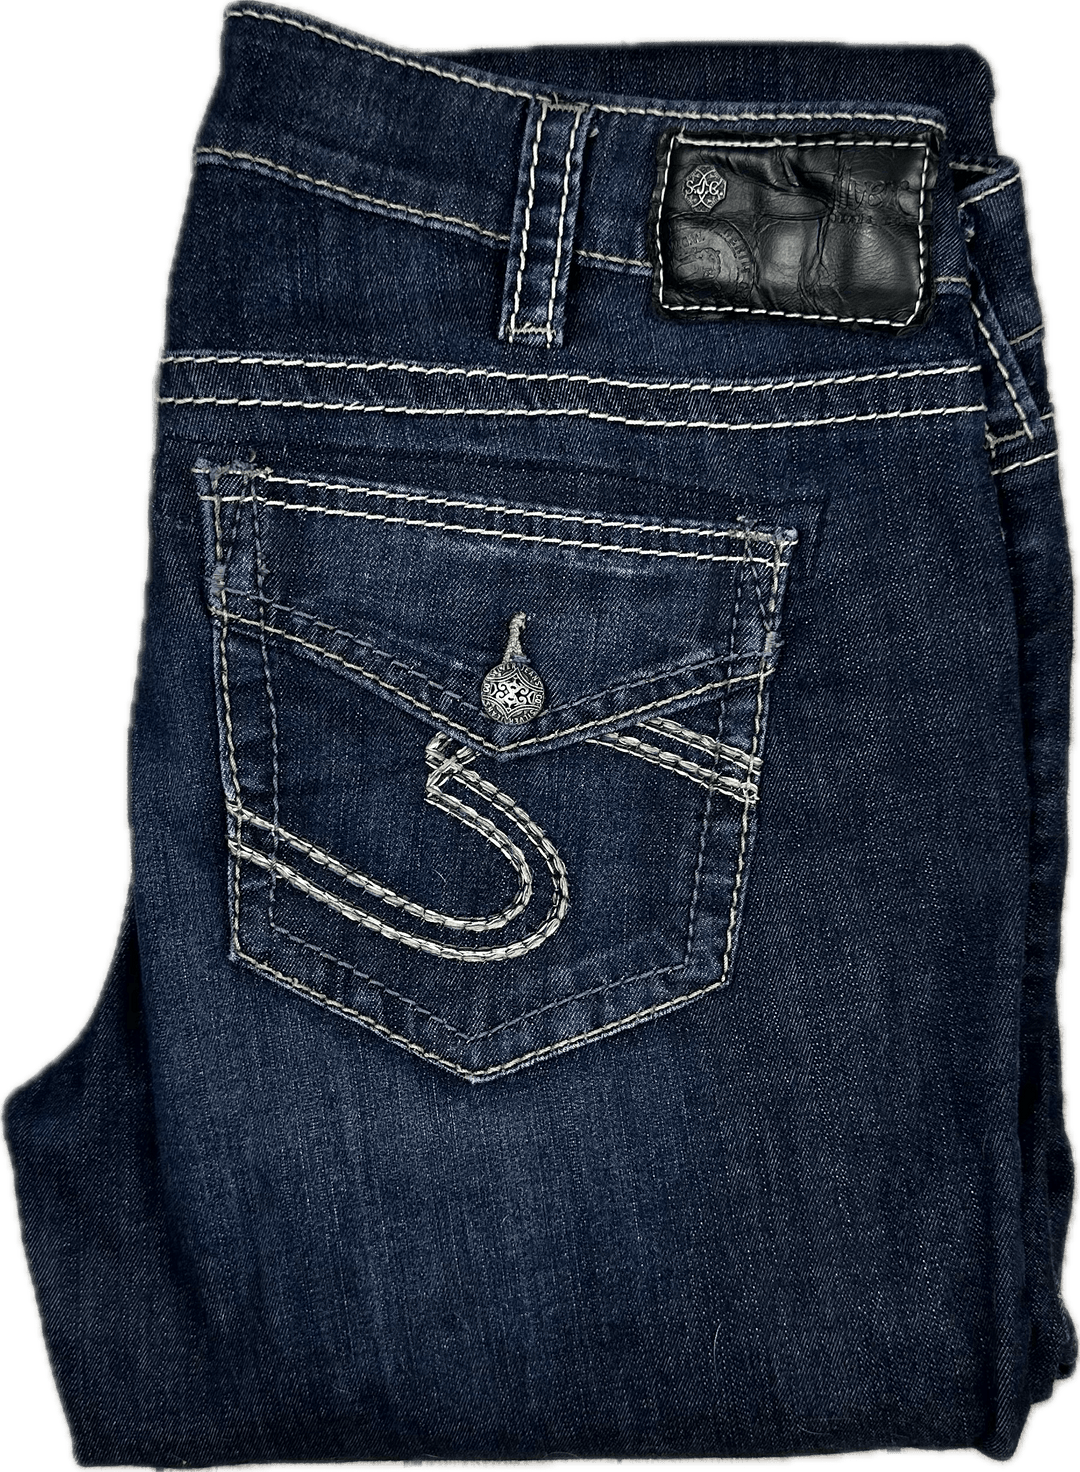 Silver Jeans Co. 'Aiko Mid Slim Boot' Jeans - Size 31/35 - Jean Pool